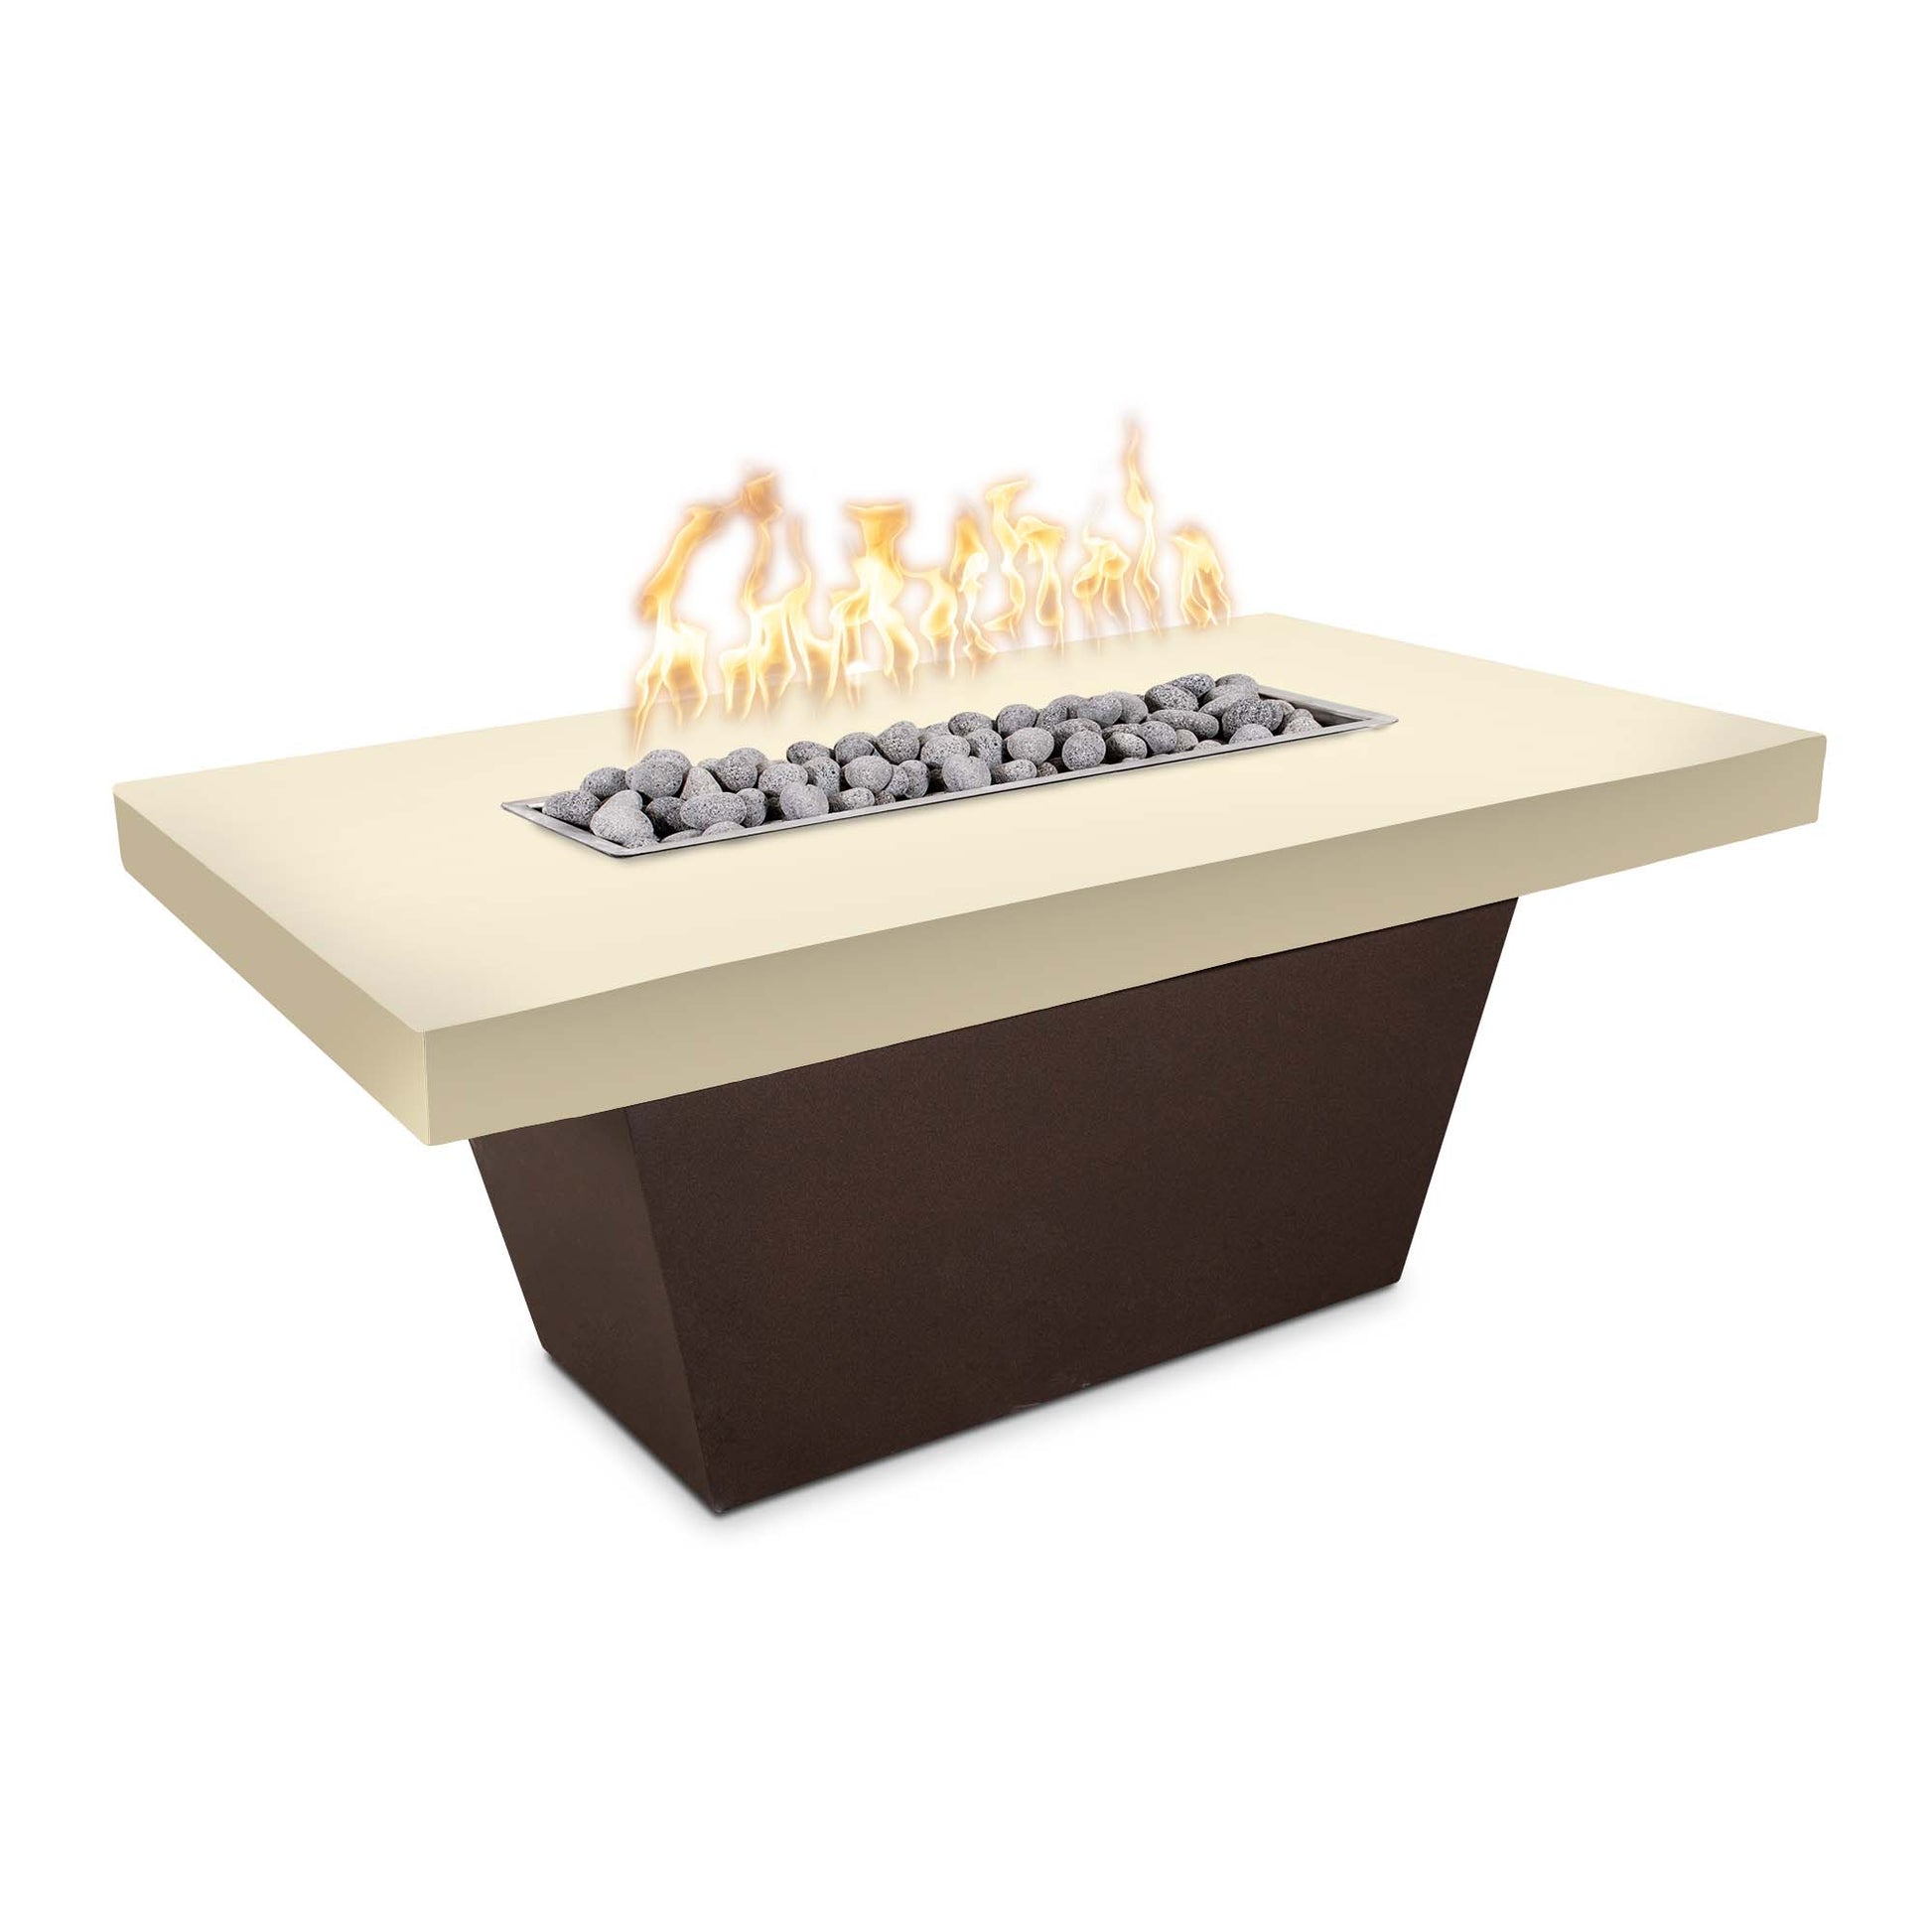 The Outdoor Plus Tacoma 48" White Limestone Concrete Top & Java Powder Coated Base Liquid Propane Fire Table with Match Lit Ignition